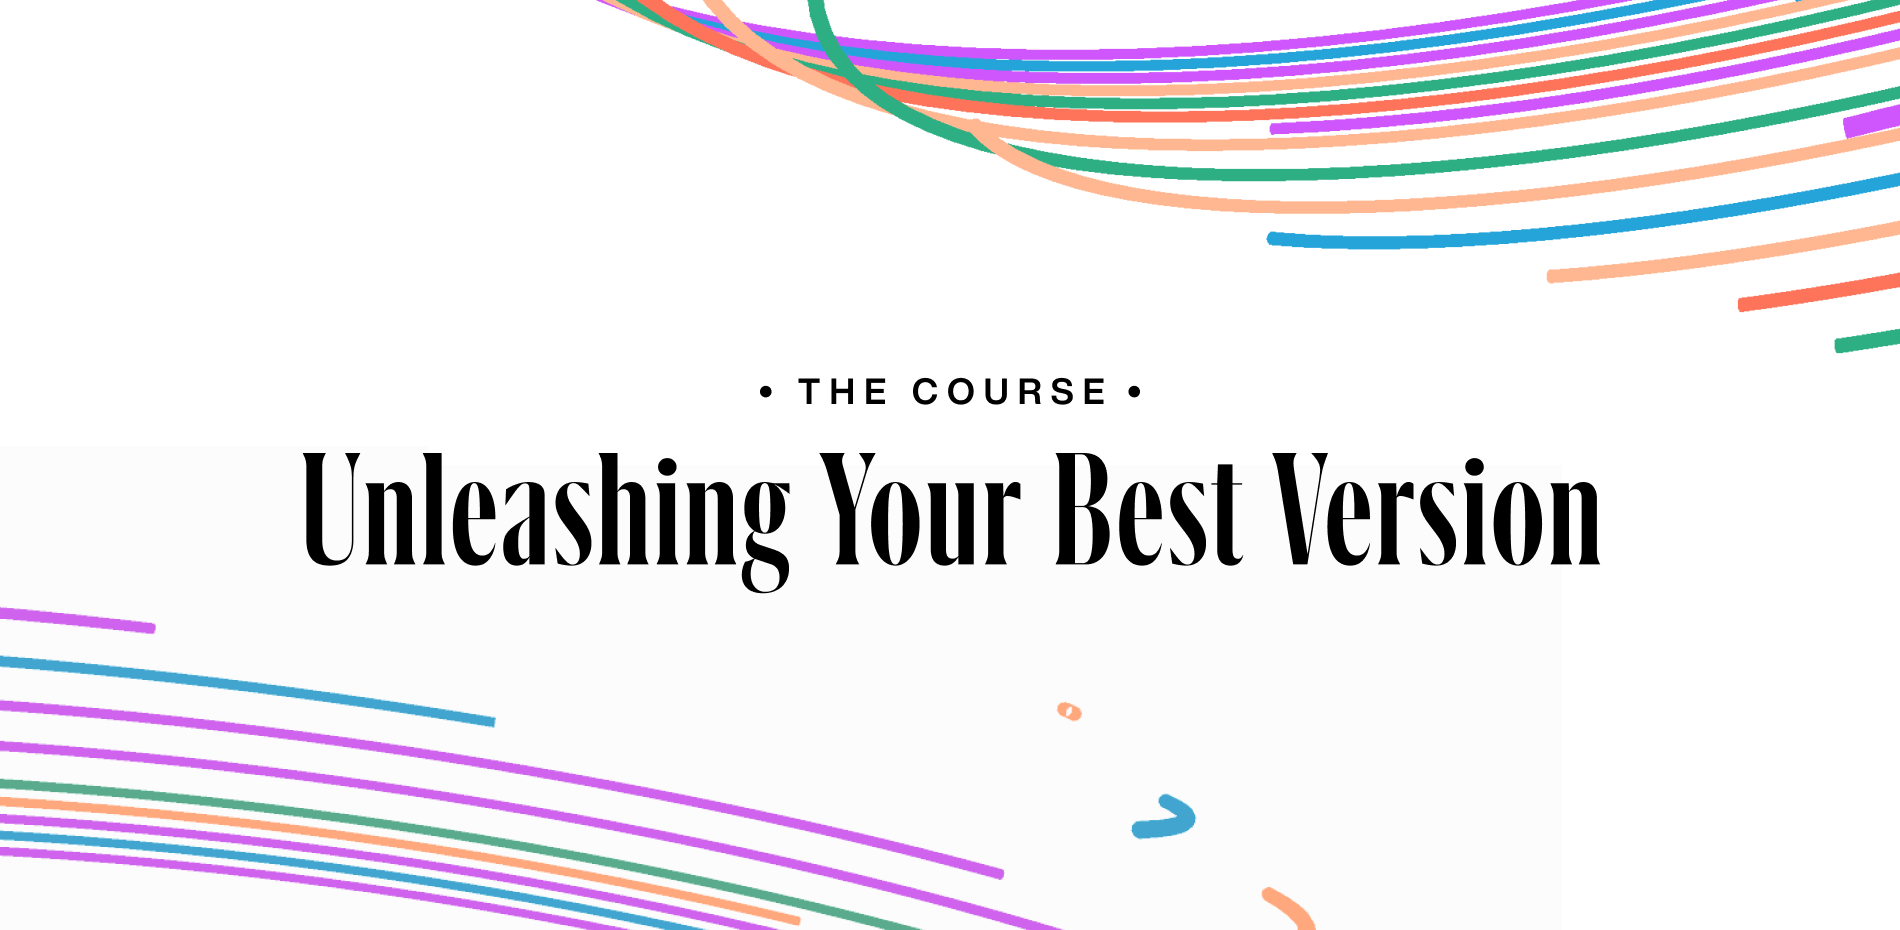 Unleashing Your Best Version by Victor Work Wins SOTM July 2022